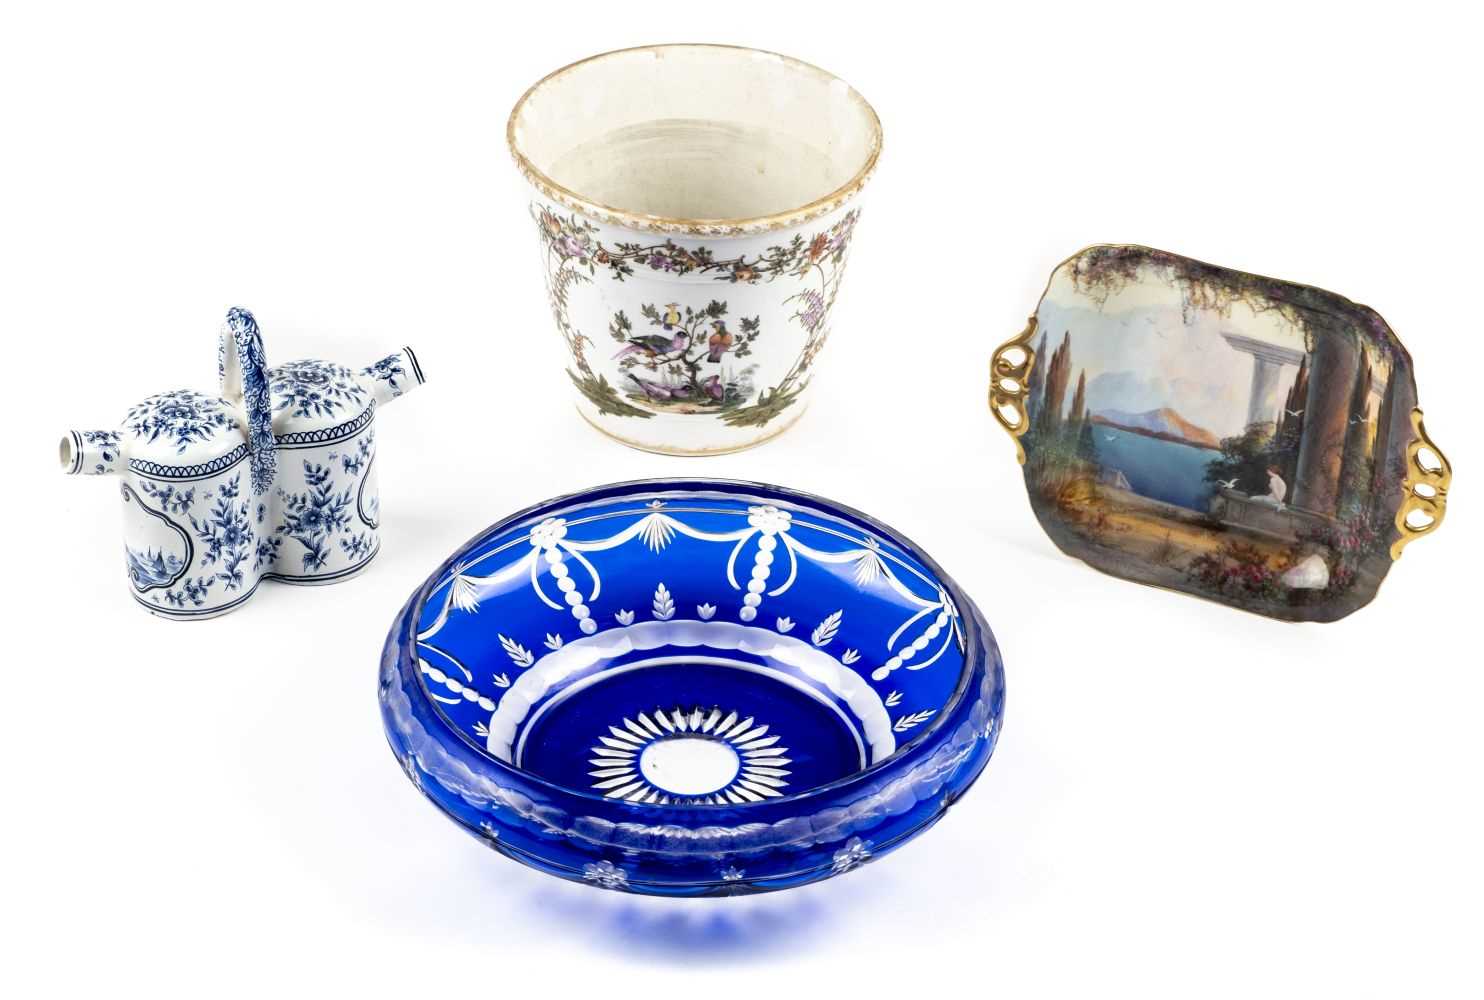 Lot 69 - Ceramics & glass. An early 20th-century Royal Worcester twin handle dish and other items